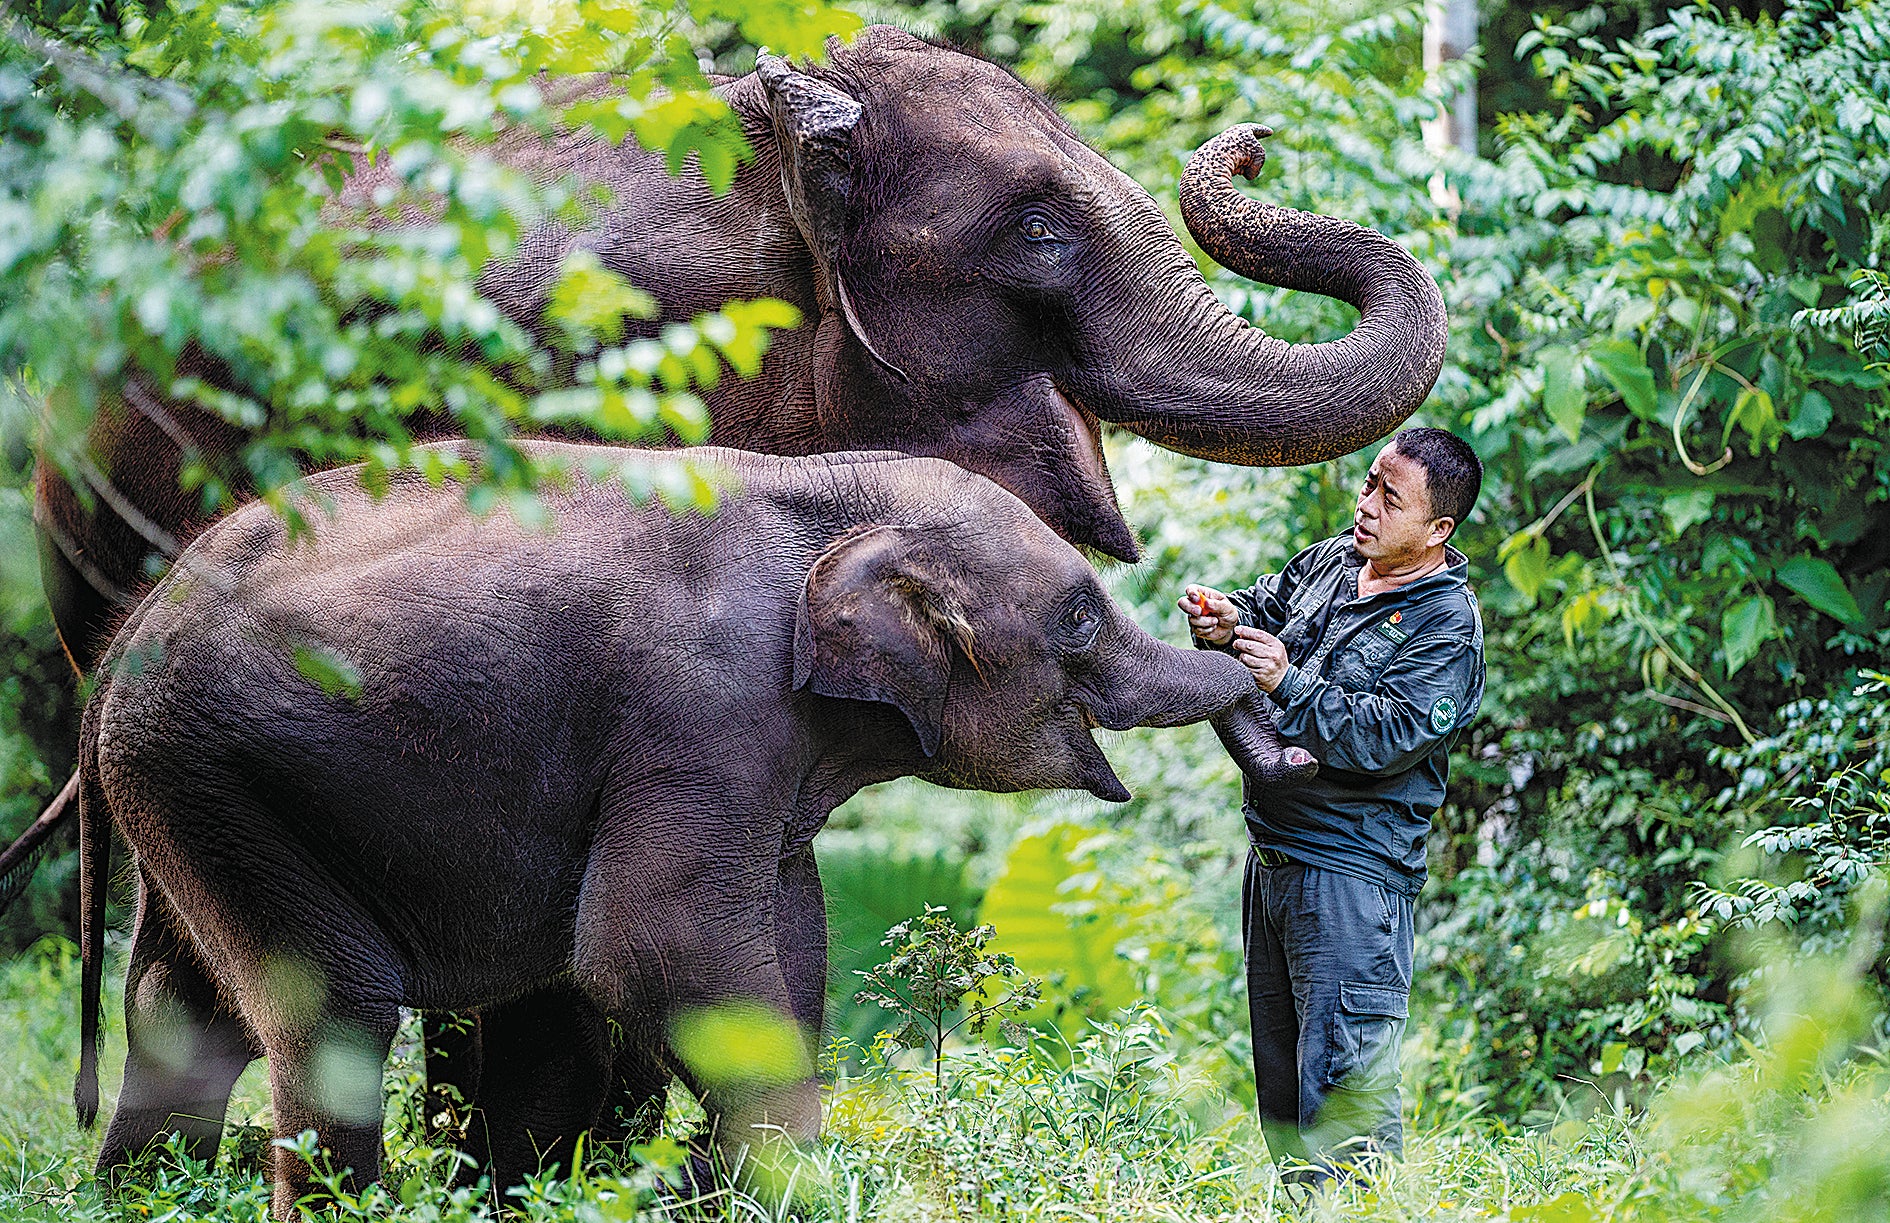 Bao Mingwei, a veterinarian from Wild Elephant Valley in Xishuangbanna Dai autonomous prefecture, Yunnan, inspects elephants in the wild